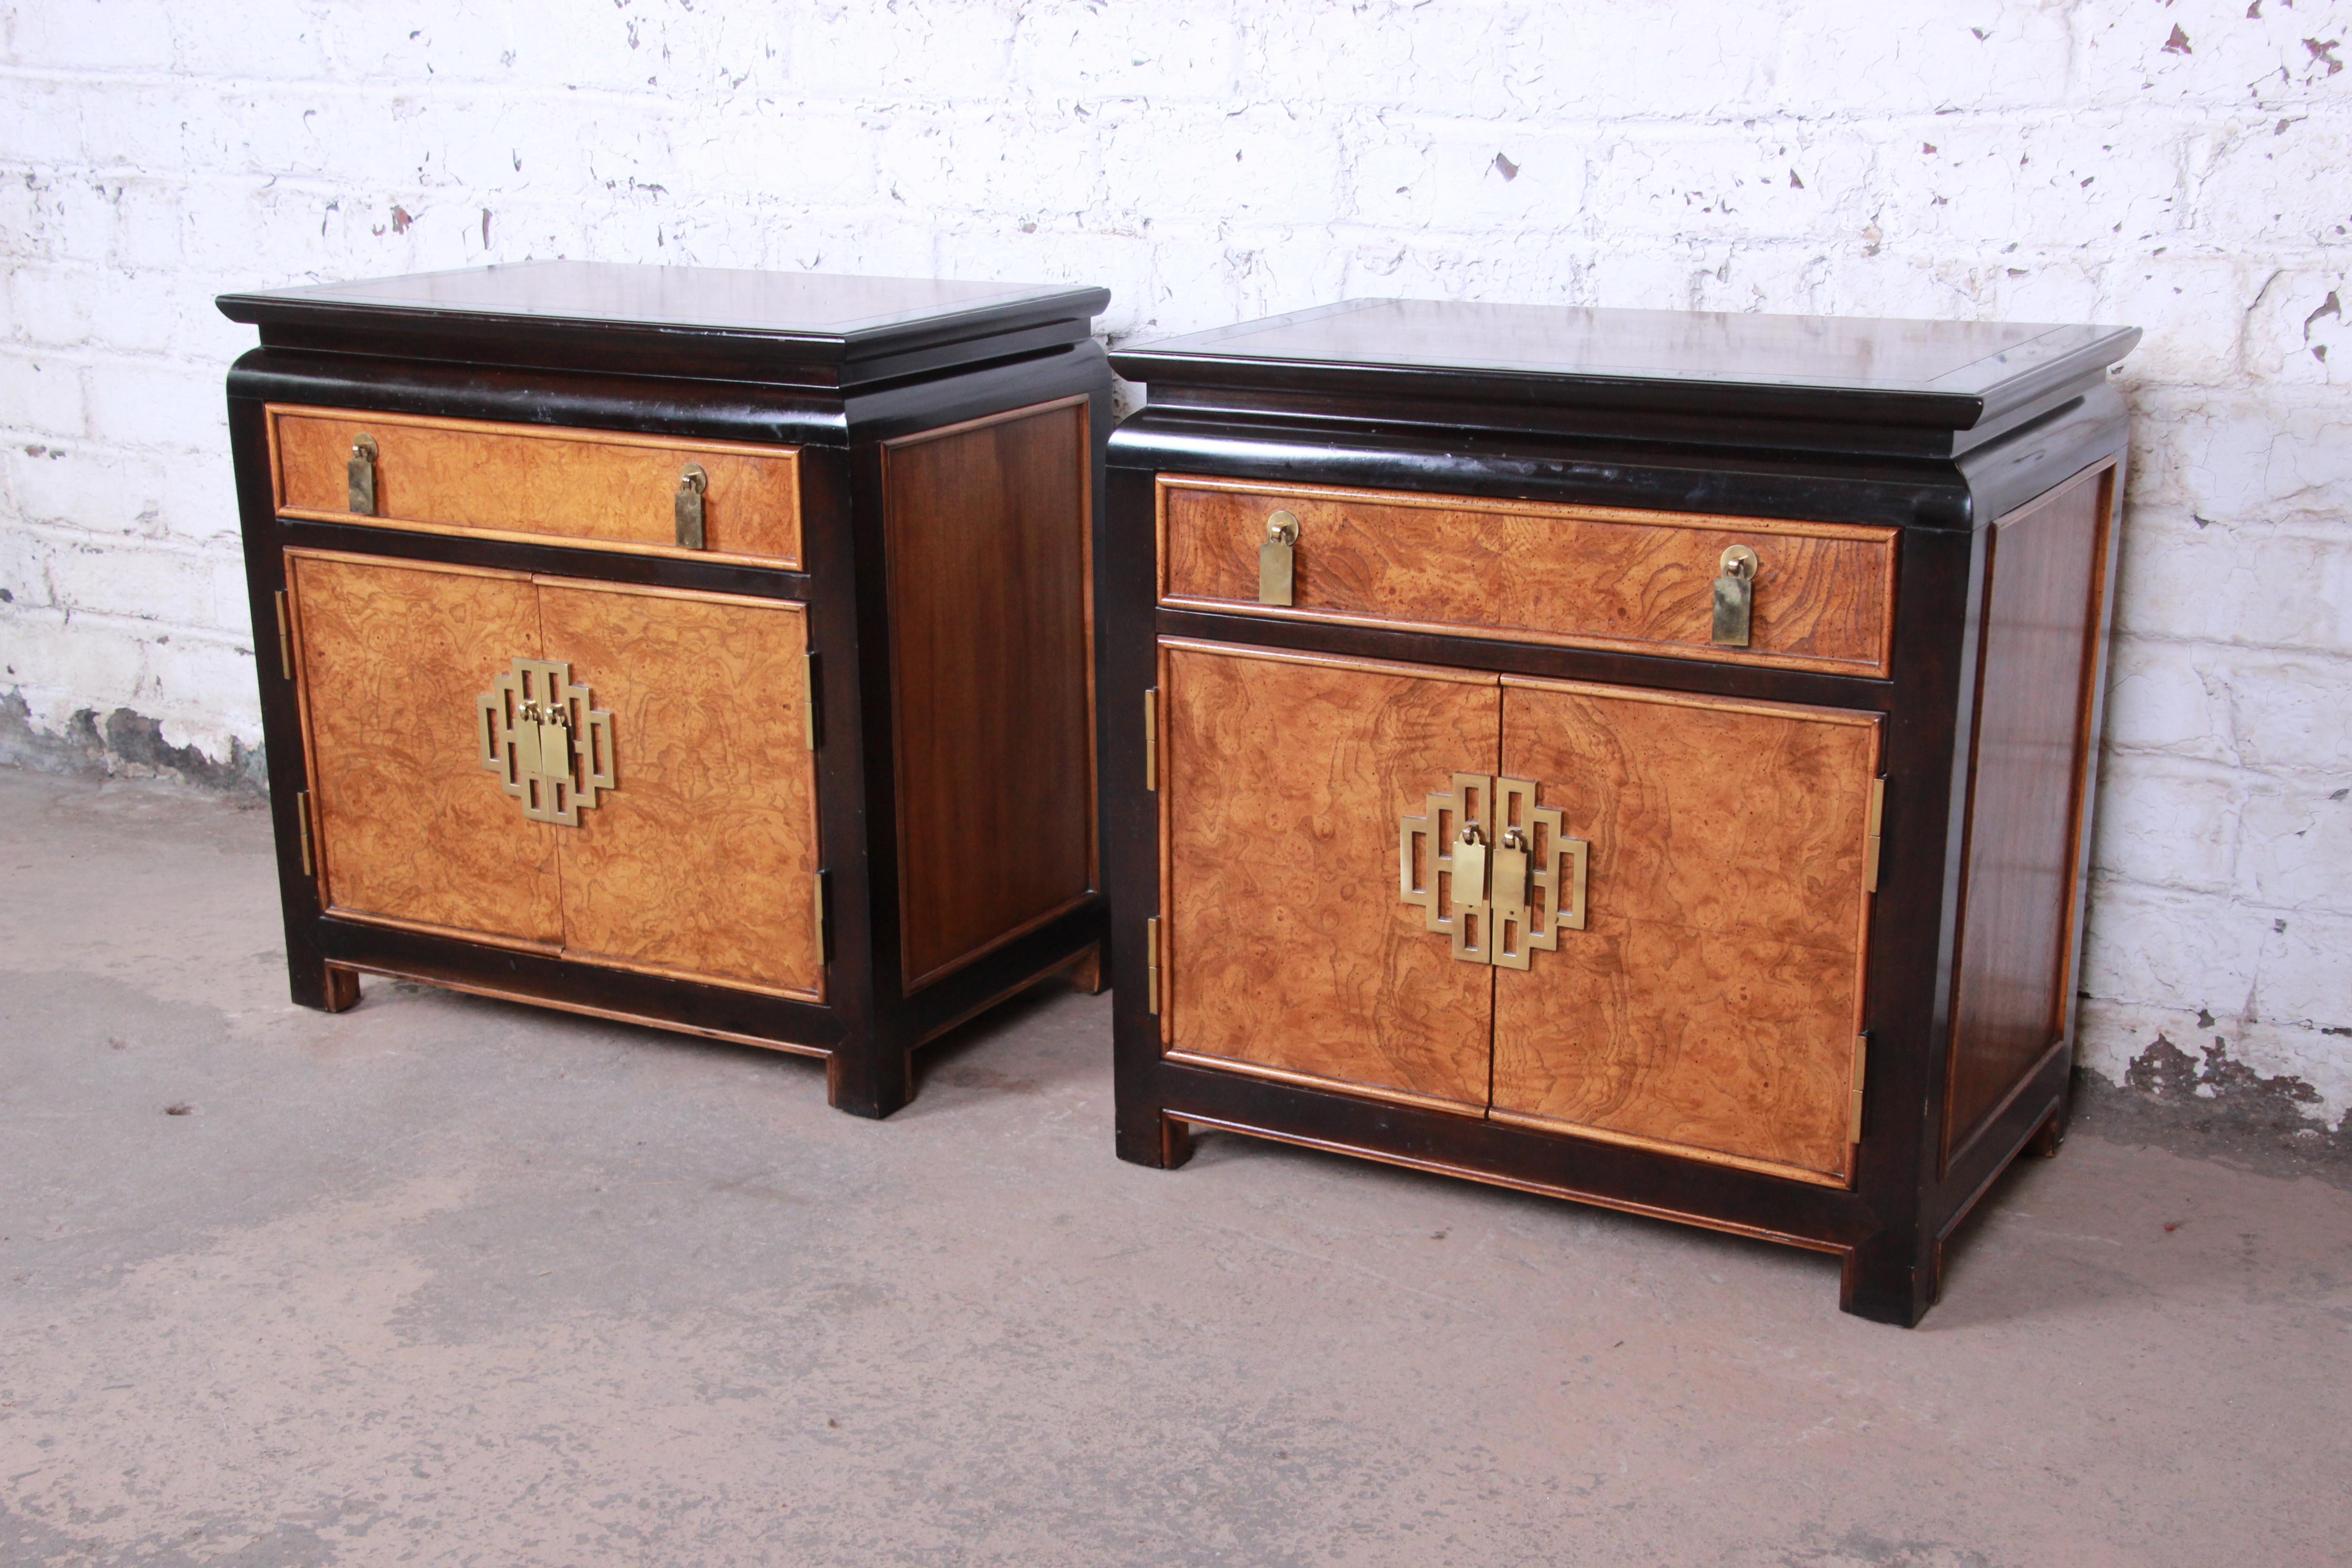 An excellent pair of Hollywood Regency chinoiserie nightstands or end tables from the Chin Hua Collection by Century Furniture. The nightstands feature gorgeous burl wood grain with black lacquered trim and original Asian-inspired brass hardware.